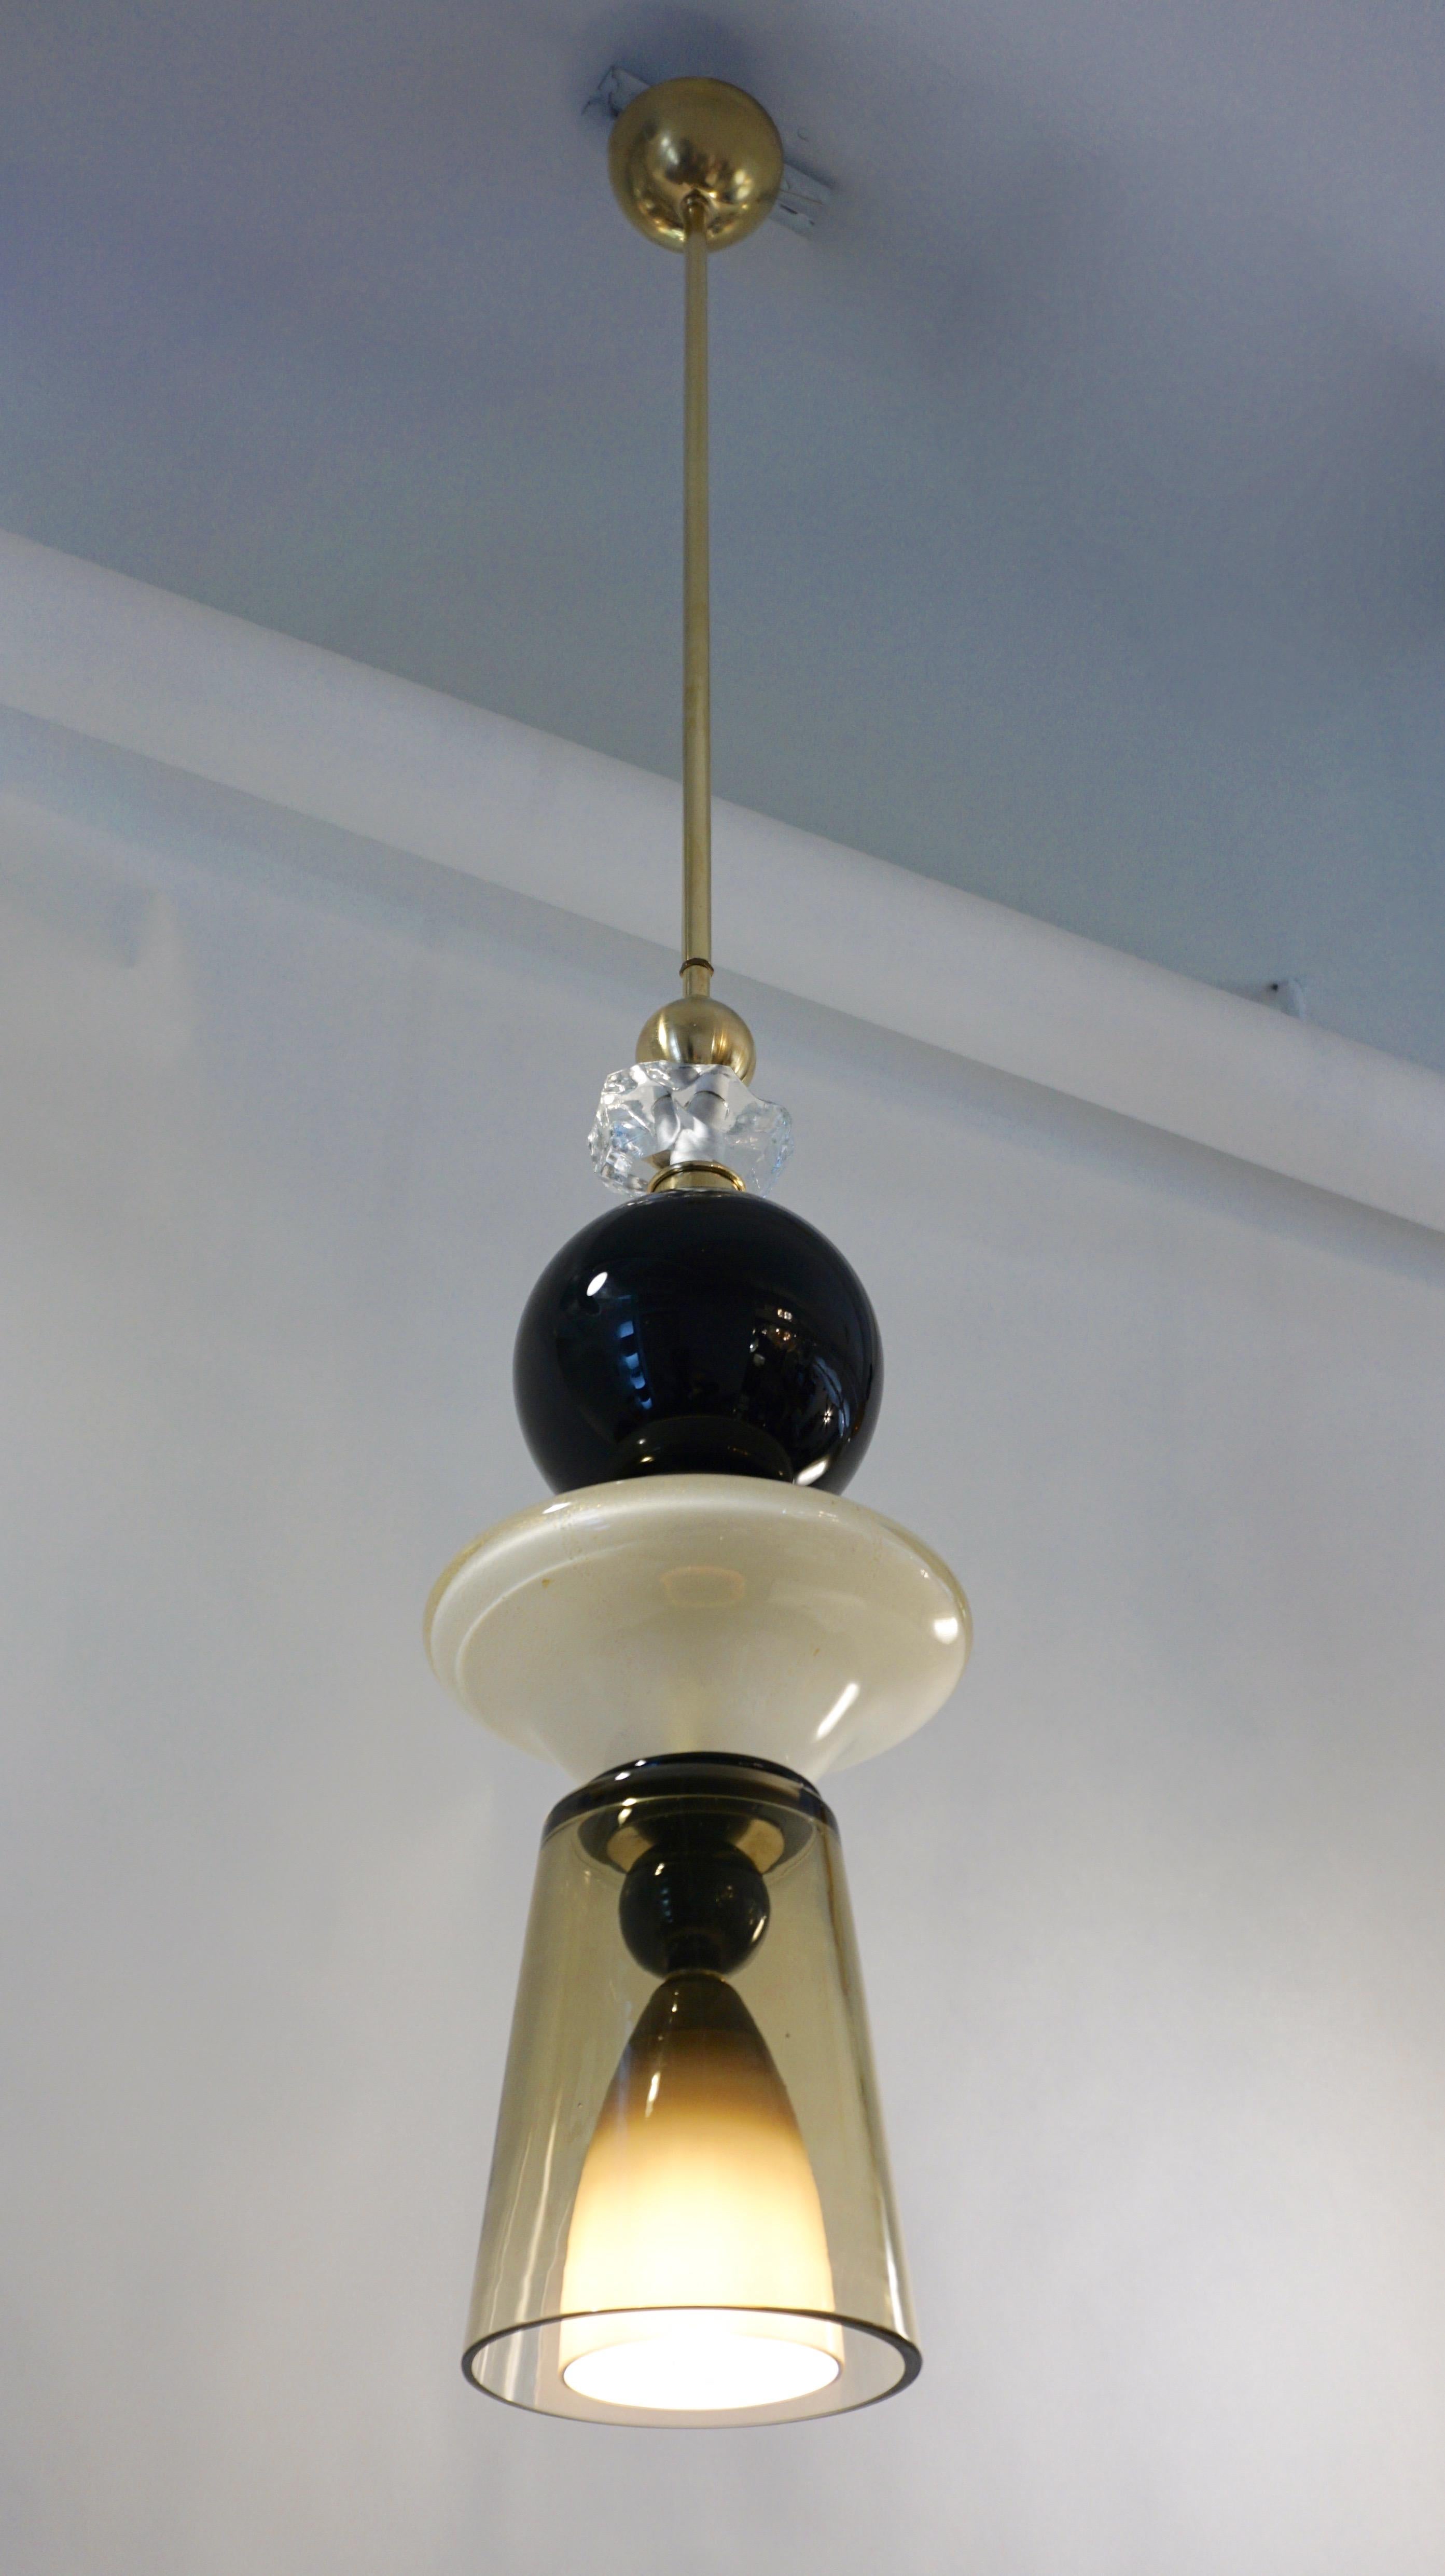 Fun and elegant Italian pendant chandelier, entirely handcrafted, of organic modern design consisting of a succession of elements: black opaline glass and brass spheres, a hand-cut jewel like rock glass decoration, a saucer shaped ivory white mouth